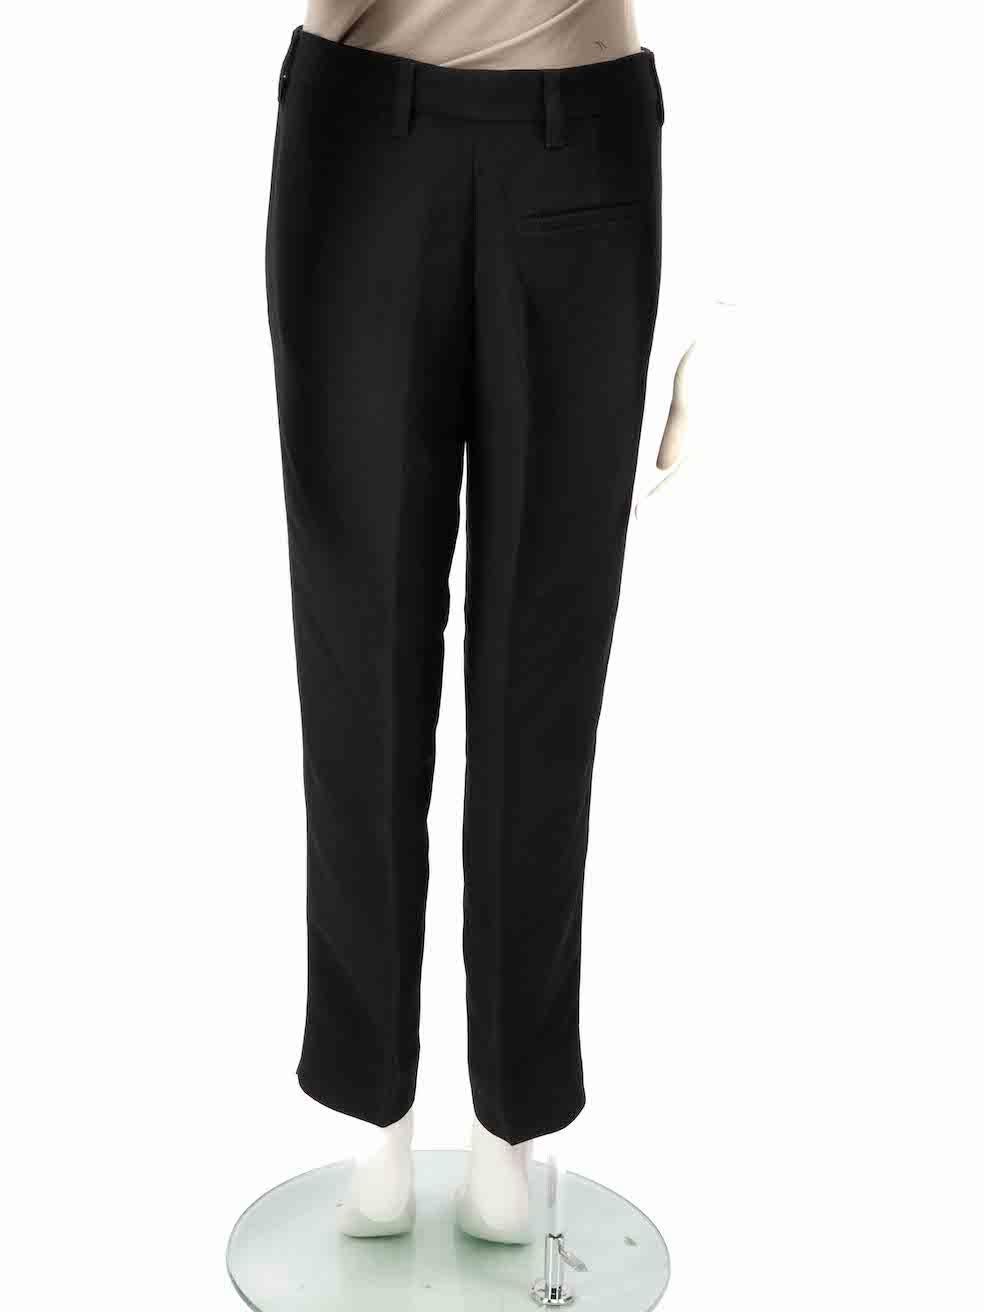 Miu Miu Black Tapered Leg Mid Rise Trousers Size S In Good Condition For Sale In London, GB